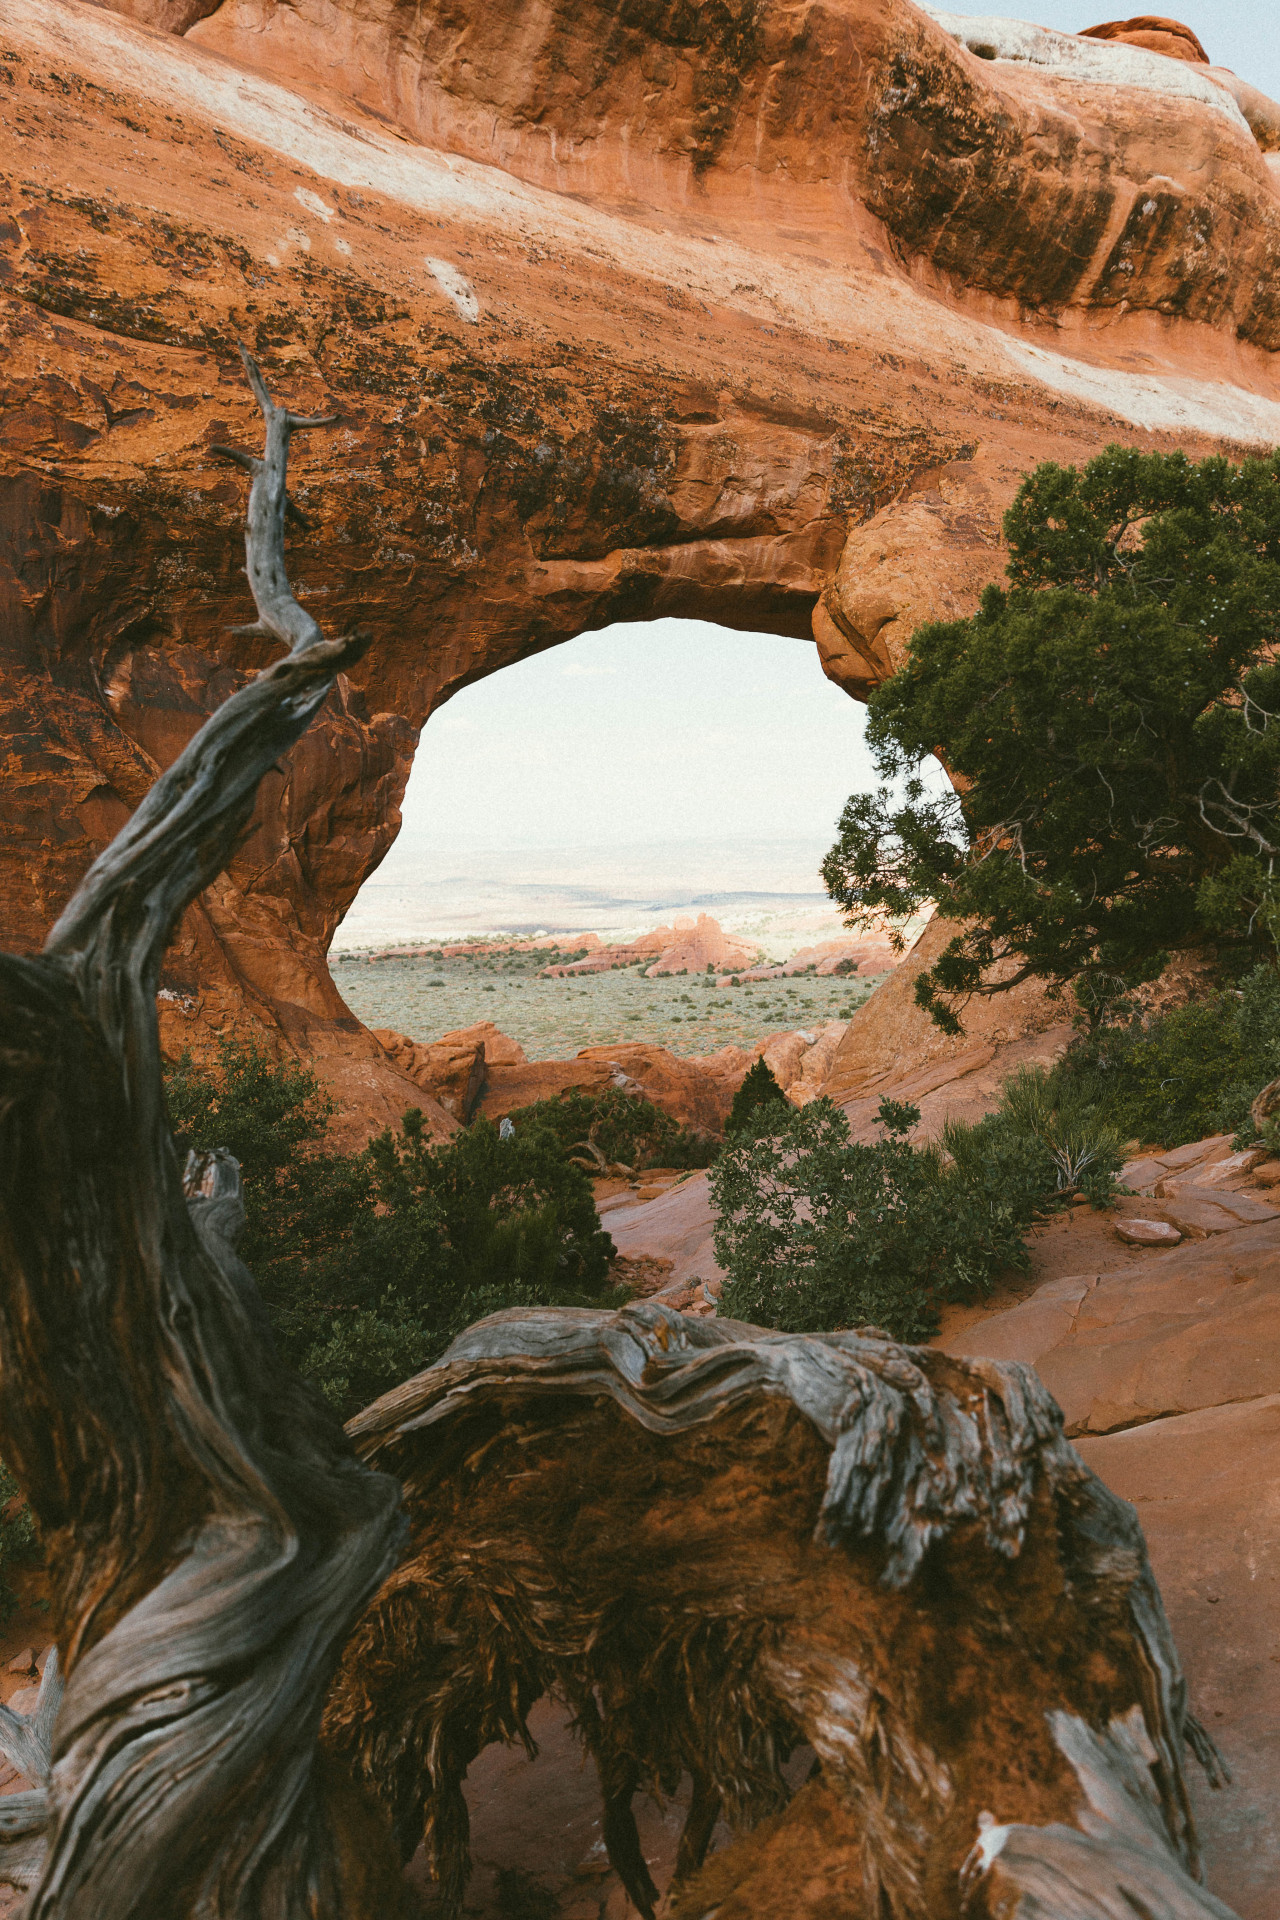 heyimchandler:
“ Looking through Partition Arch in Arches National Park
Follow me on Instagram: @chandlerbondurant
”
From here I can see
the wonderful sea.
I step through the door.
I stand at the shore.
Sand at my bare feet.
The sun shining heat.
But...